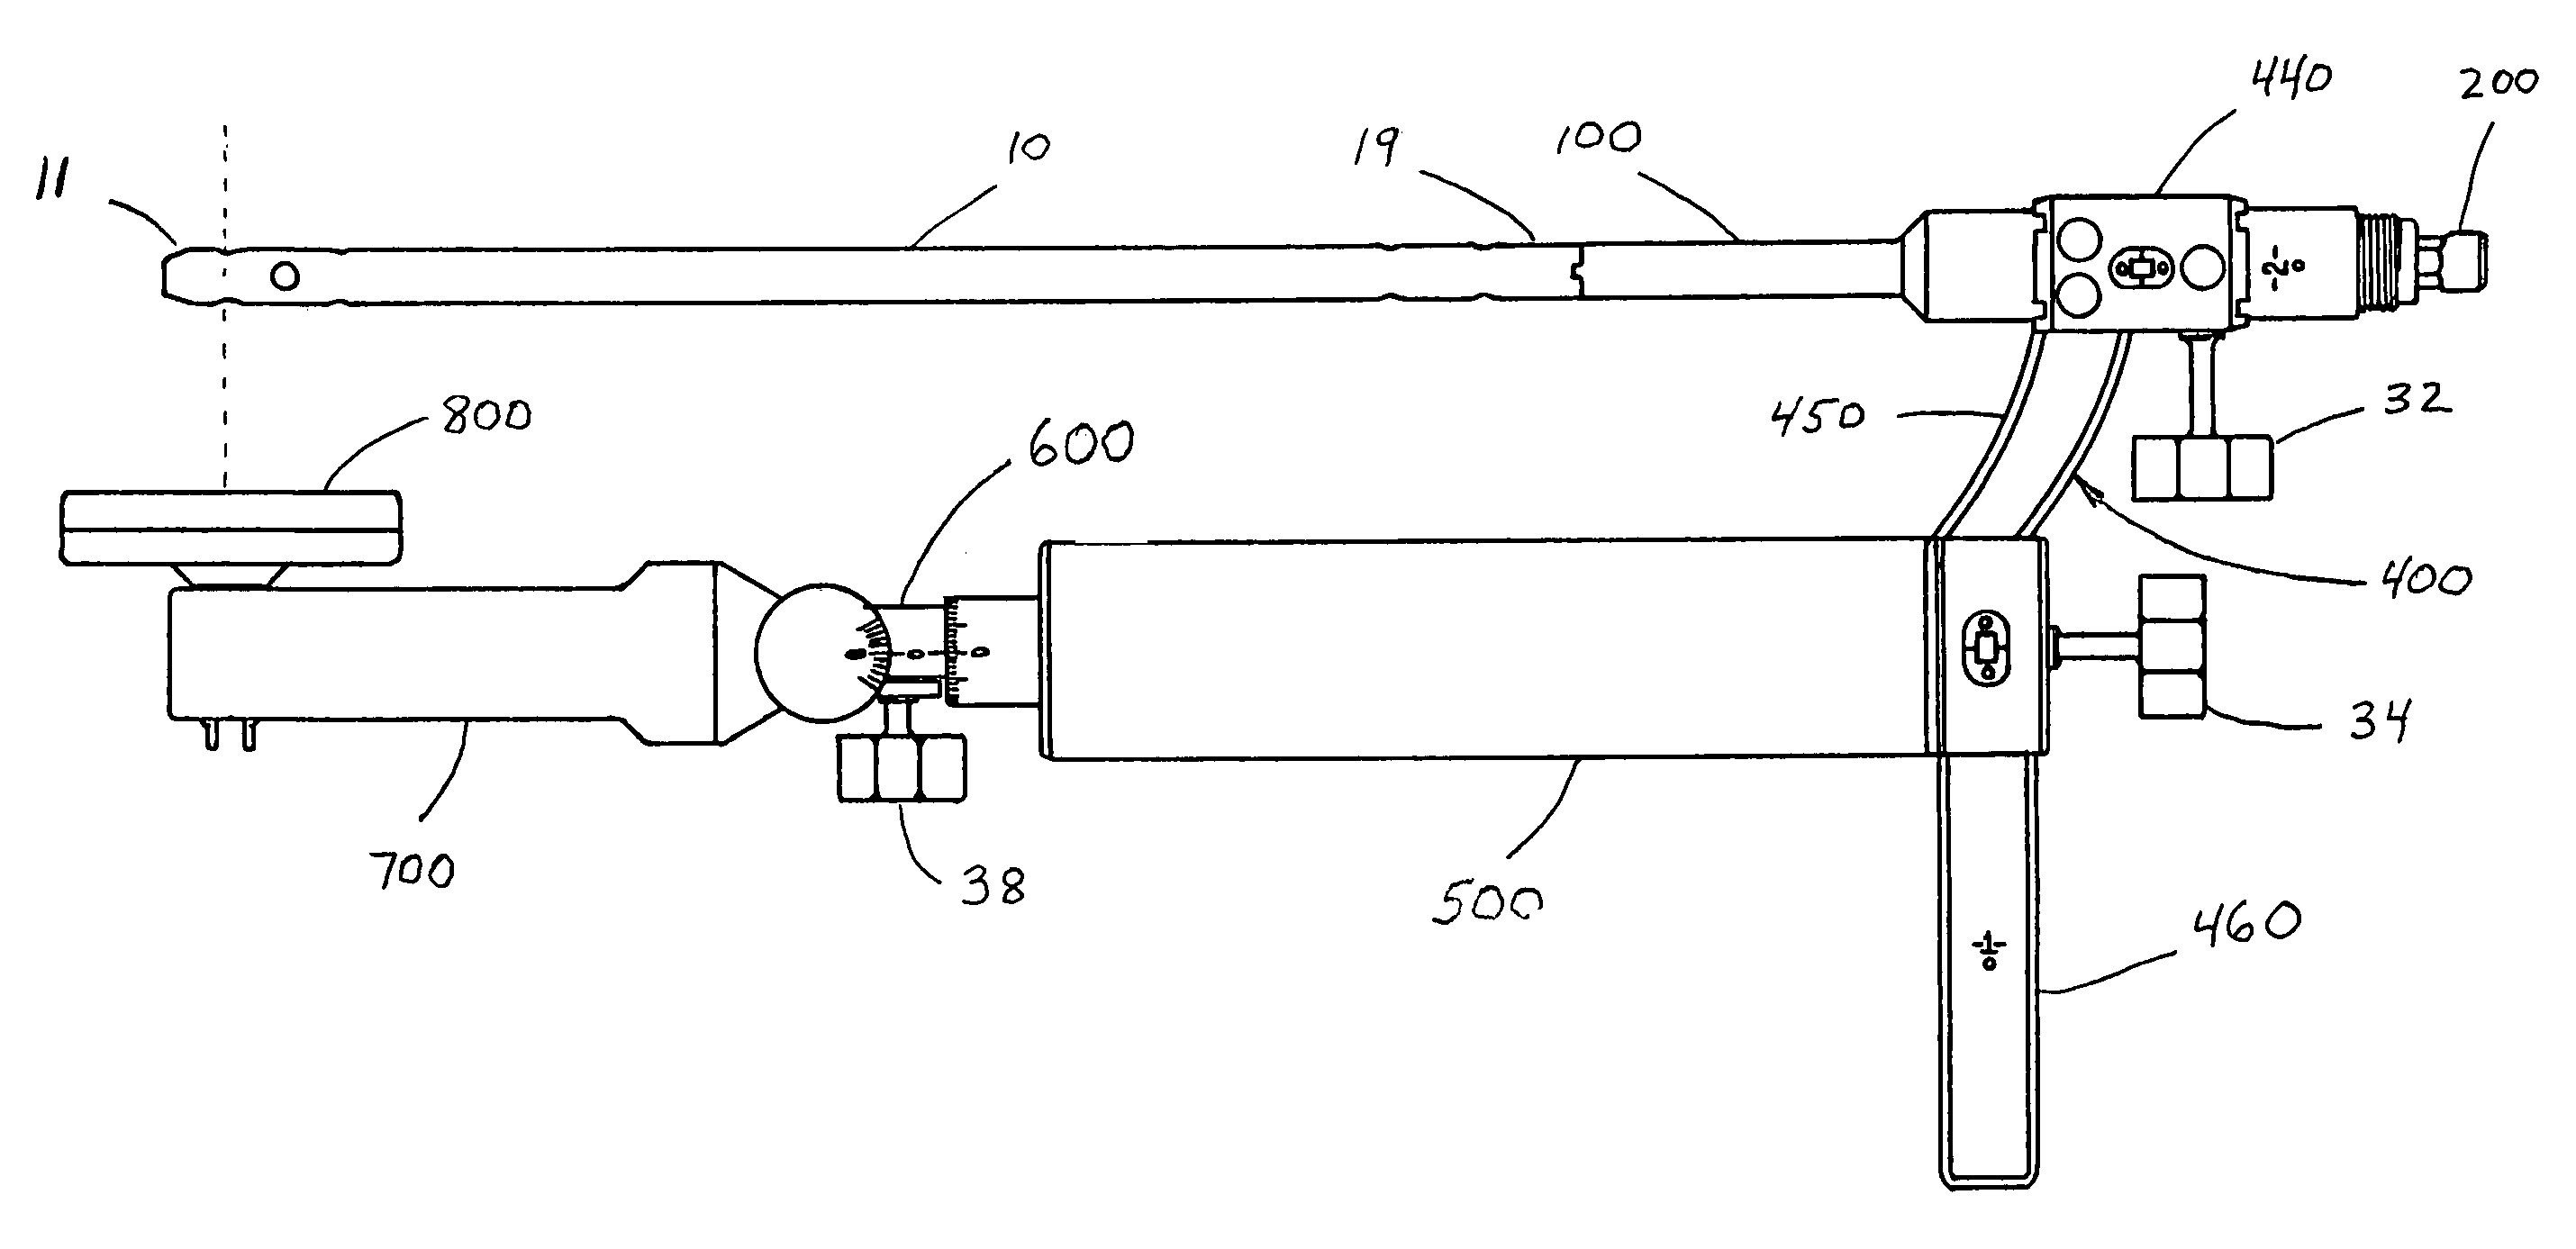 Method and system for securing an intramedullary nail